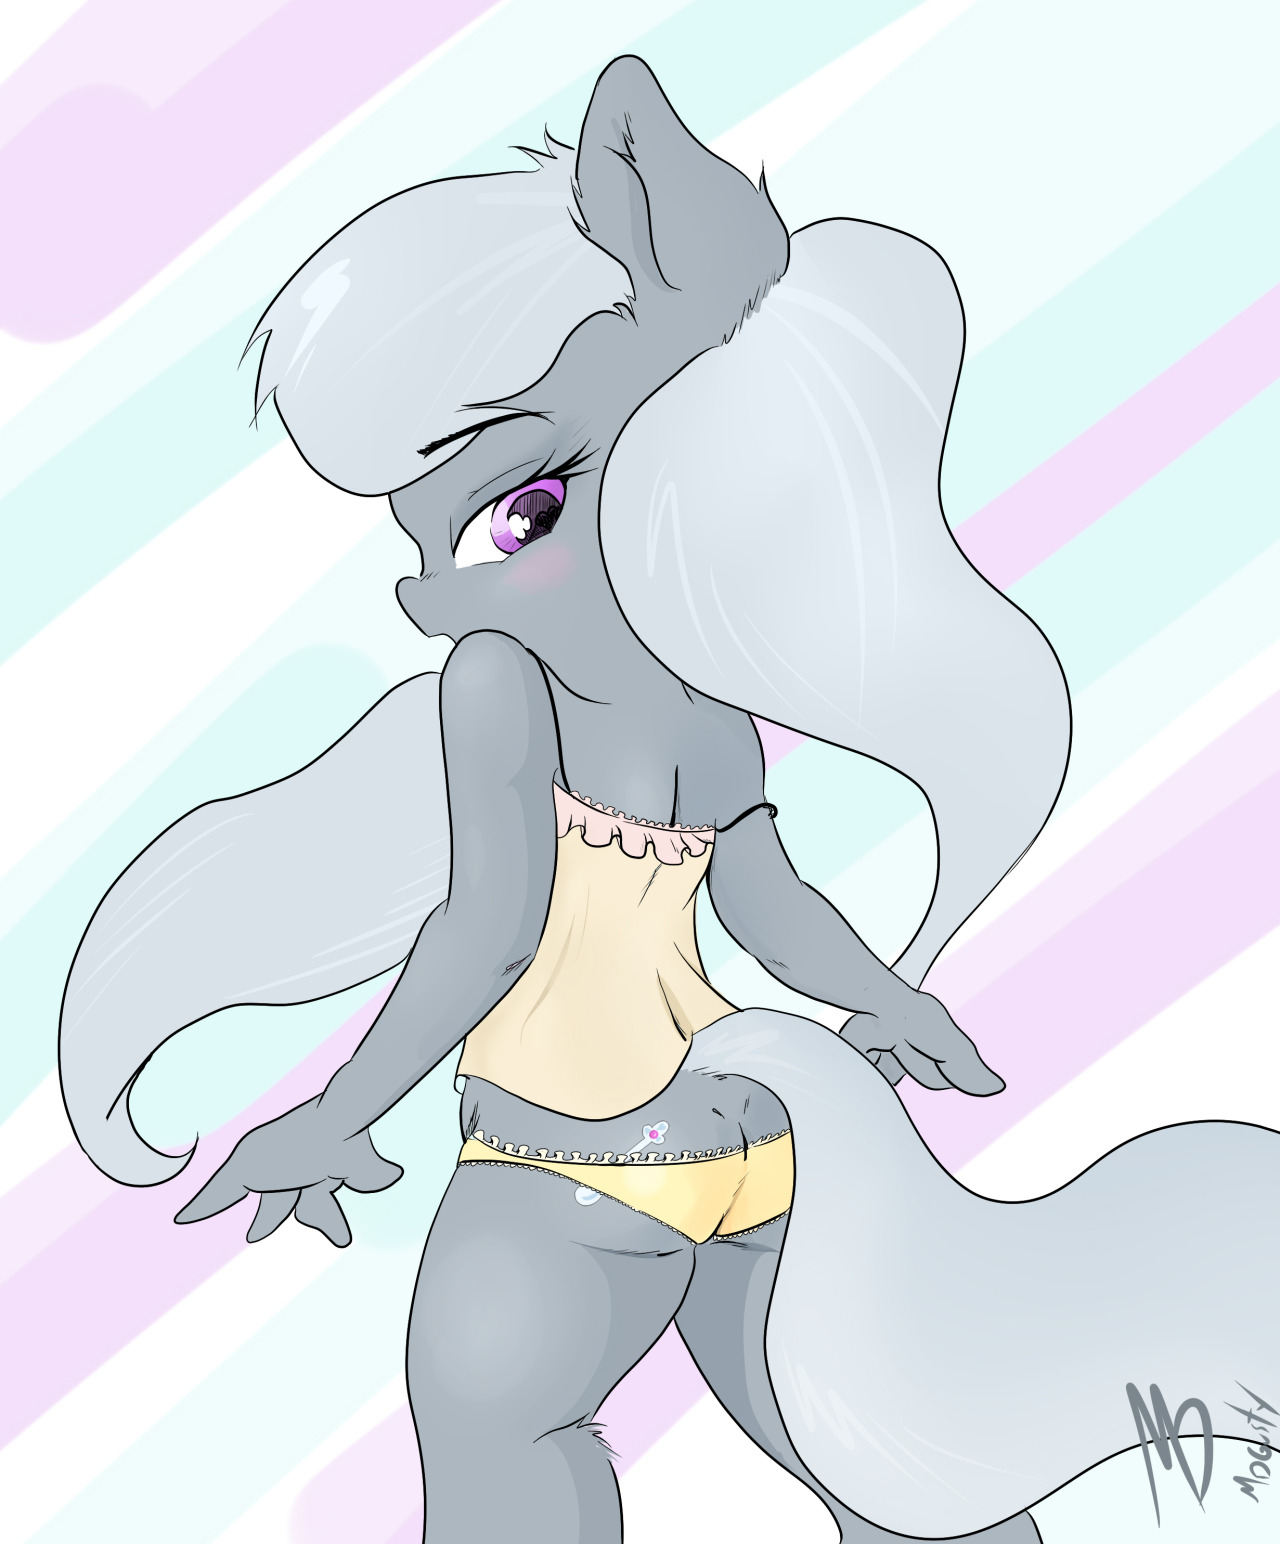 This is Silver.  She&rsquo;s like&hellip;39 years old and decided to treat